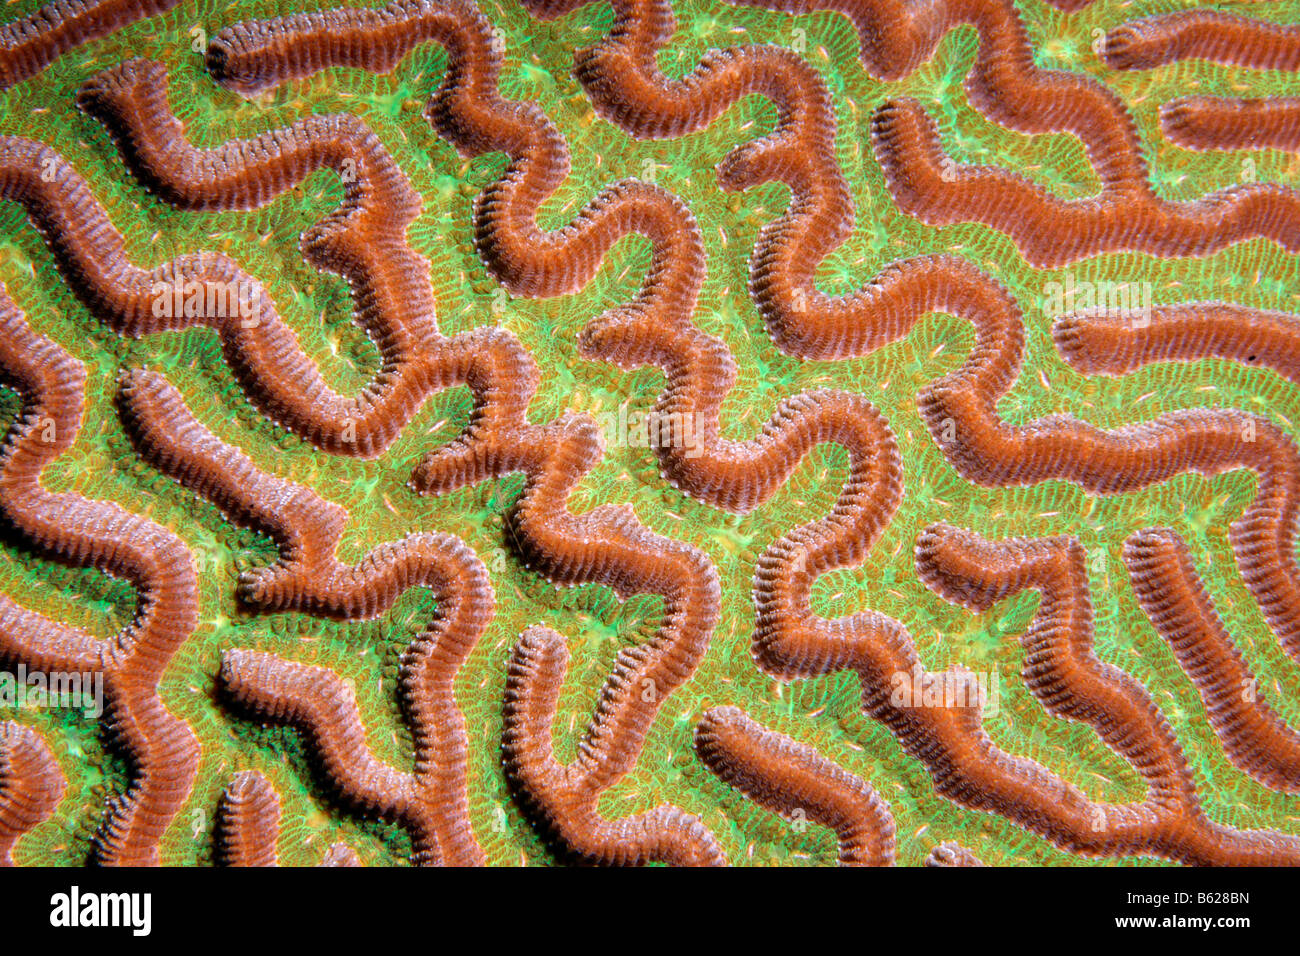 Graphic detail of the Brain Coral (Colpophyllia natans) with twists and withdrawn polyps, Barrier Reef, San Pedro, Ambergris Ca Stock Photo